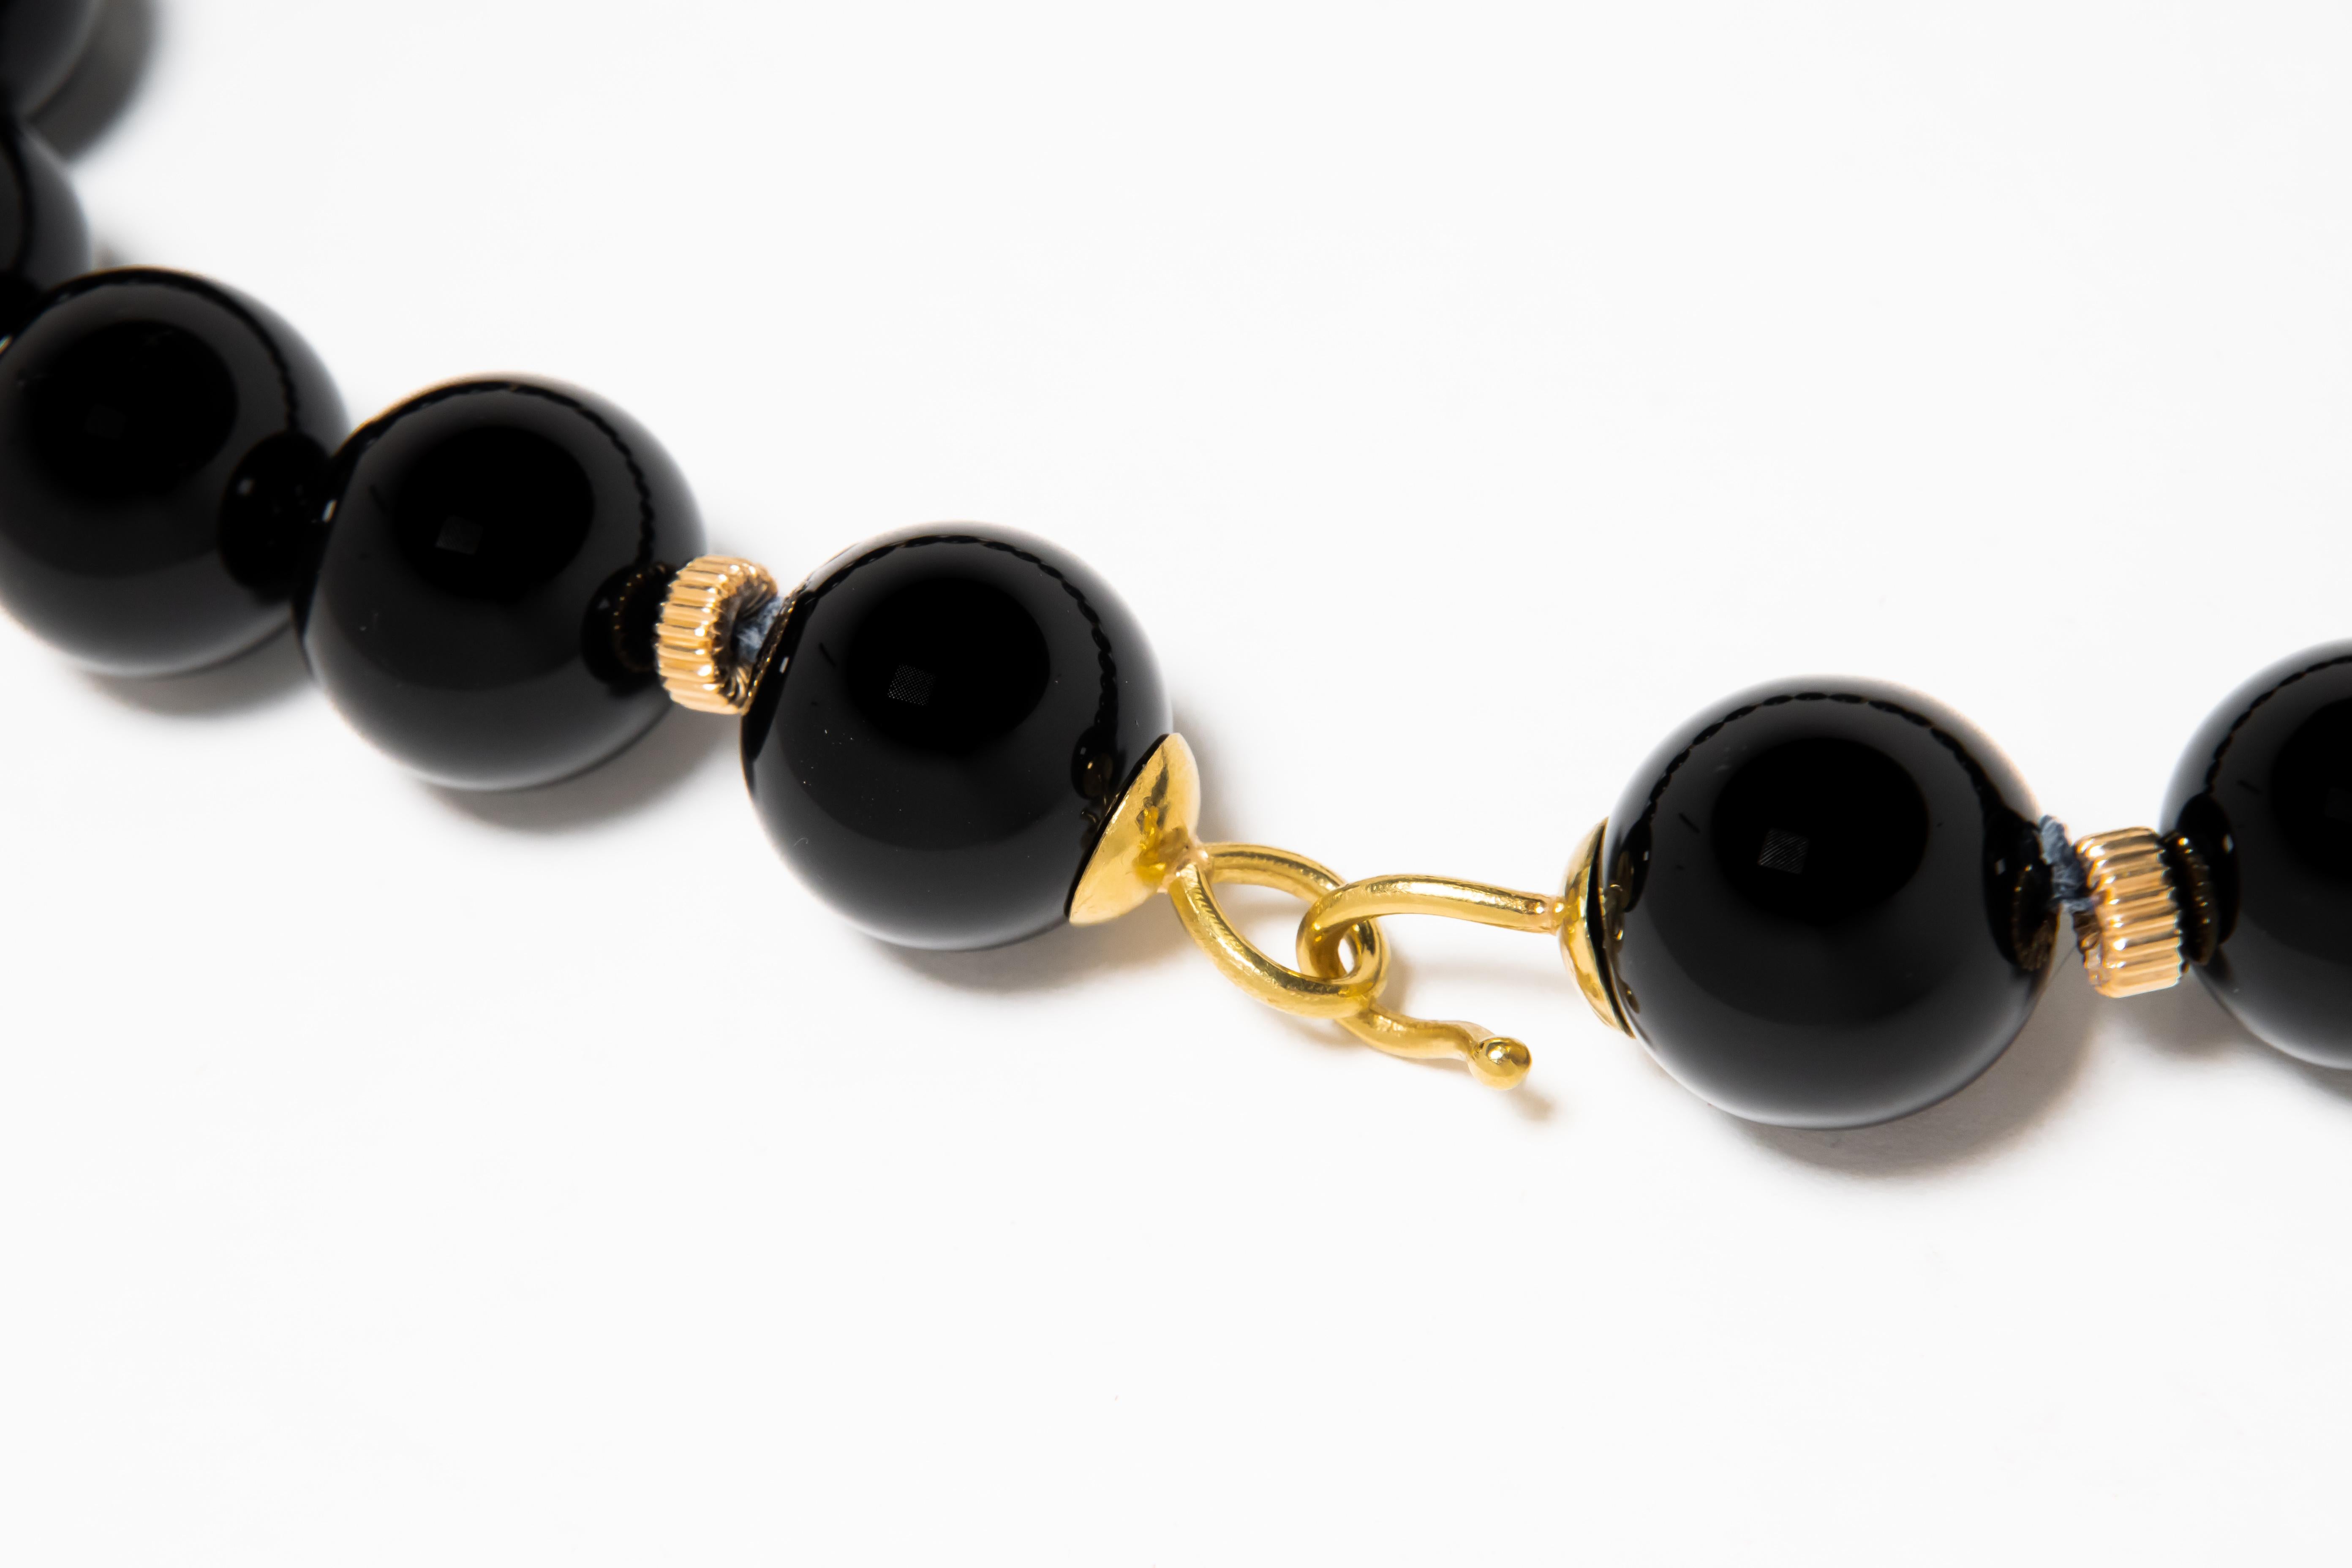 18K Julia Boss Black Onyx Beads Knobby and Fluted Rondels Curved Clasp ...